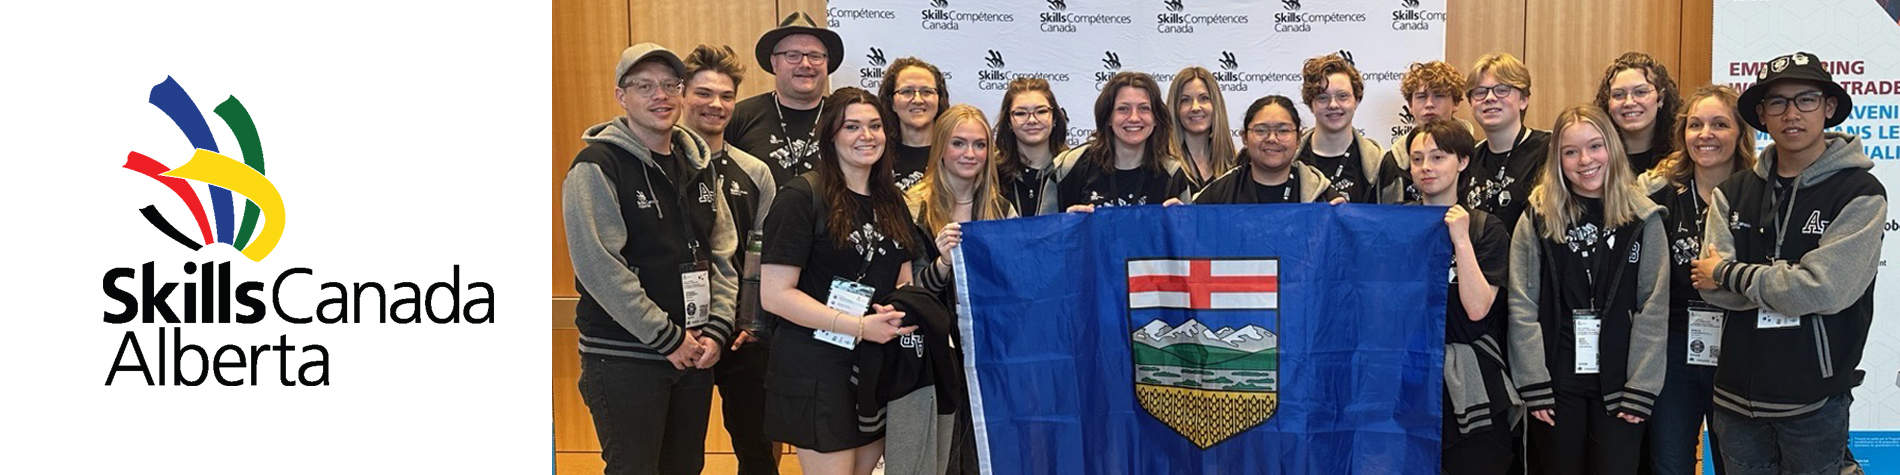 <p class="slider-title">CBE Students Win 40 Medals at Provincial and National Skills Competitions</p><div class="banner-line"></div><p class="slider-subtitle">High School students demonstrated exceptional talent and skills at trade and technology competitions</p> <a style="pointer-events:all" class=AEBannerMoreLink href="https://cbe.ab.ca/news-centre/Pages/cbe-students-win-40-medals-at-provincial-and-national-skills-competitions.aspx">Read More</a>